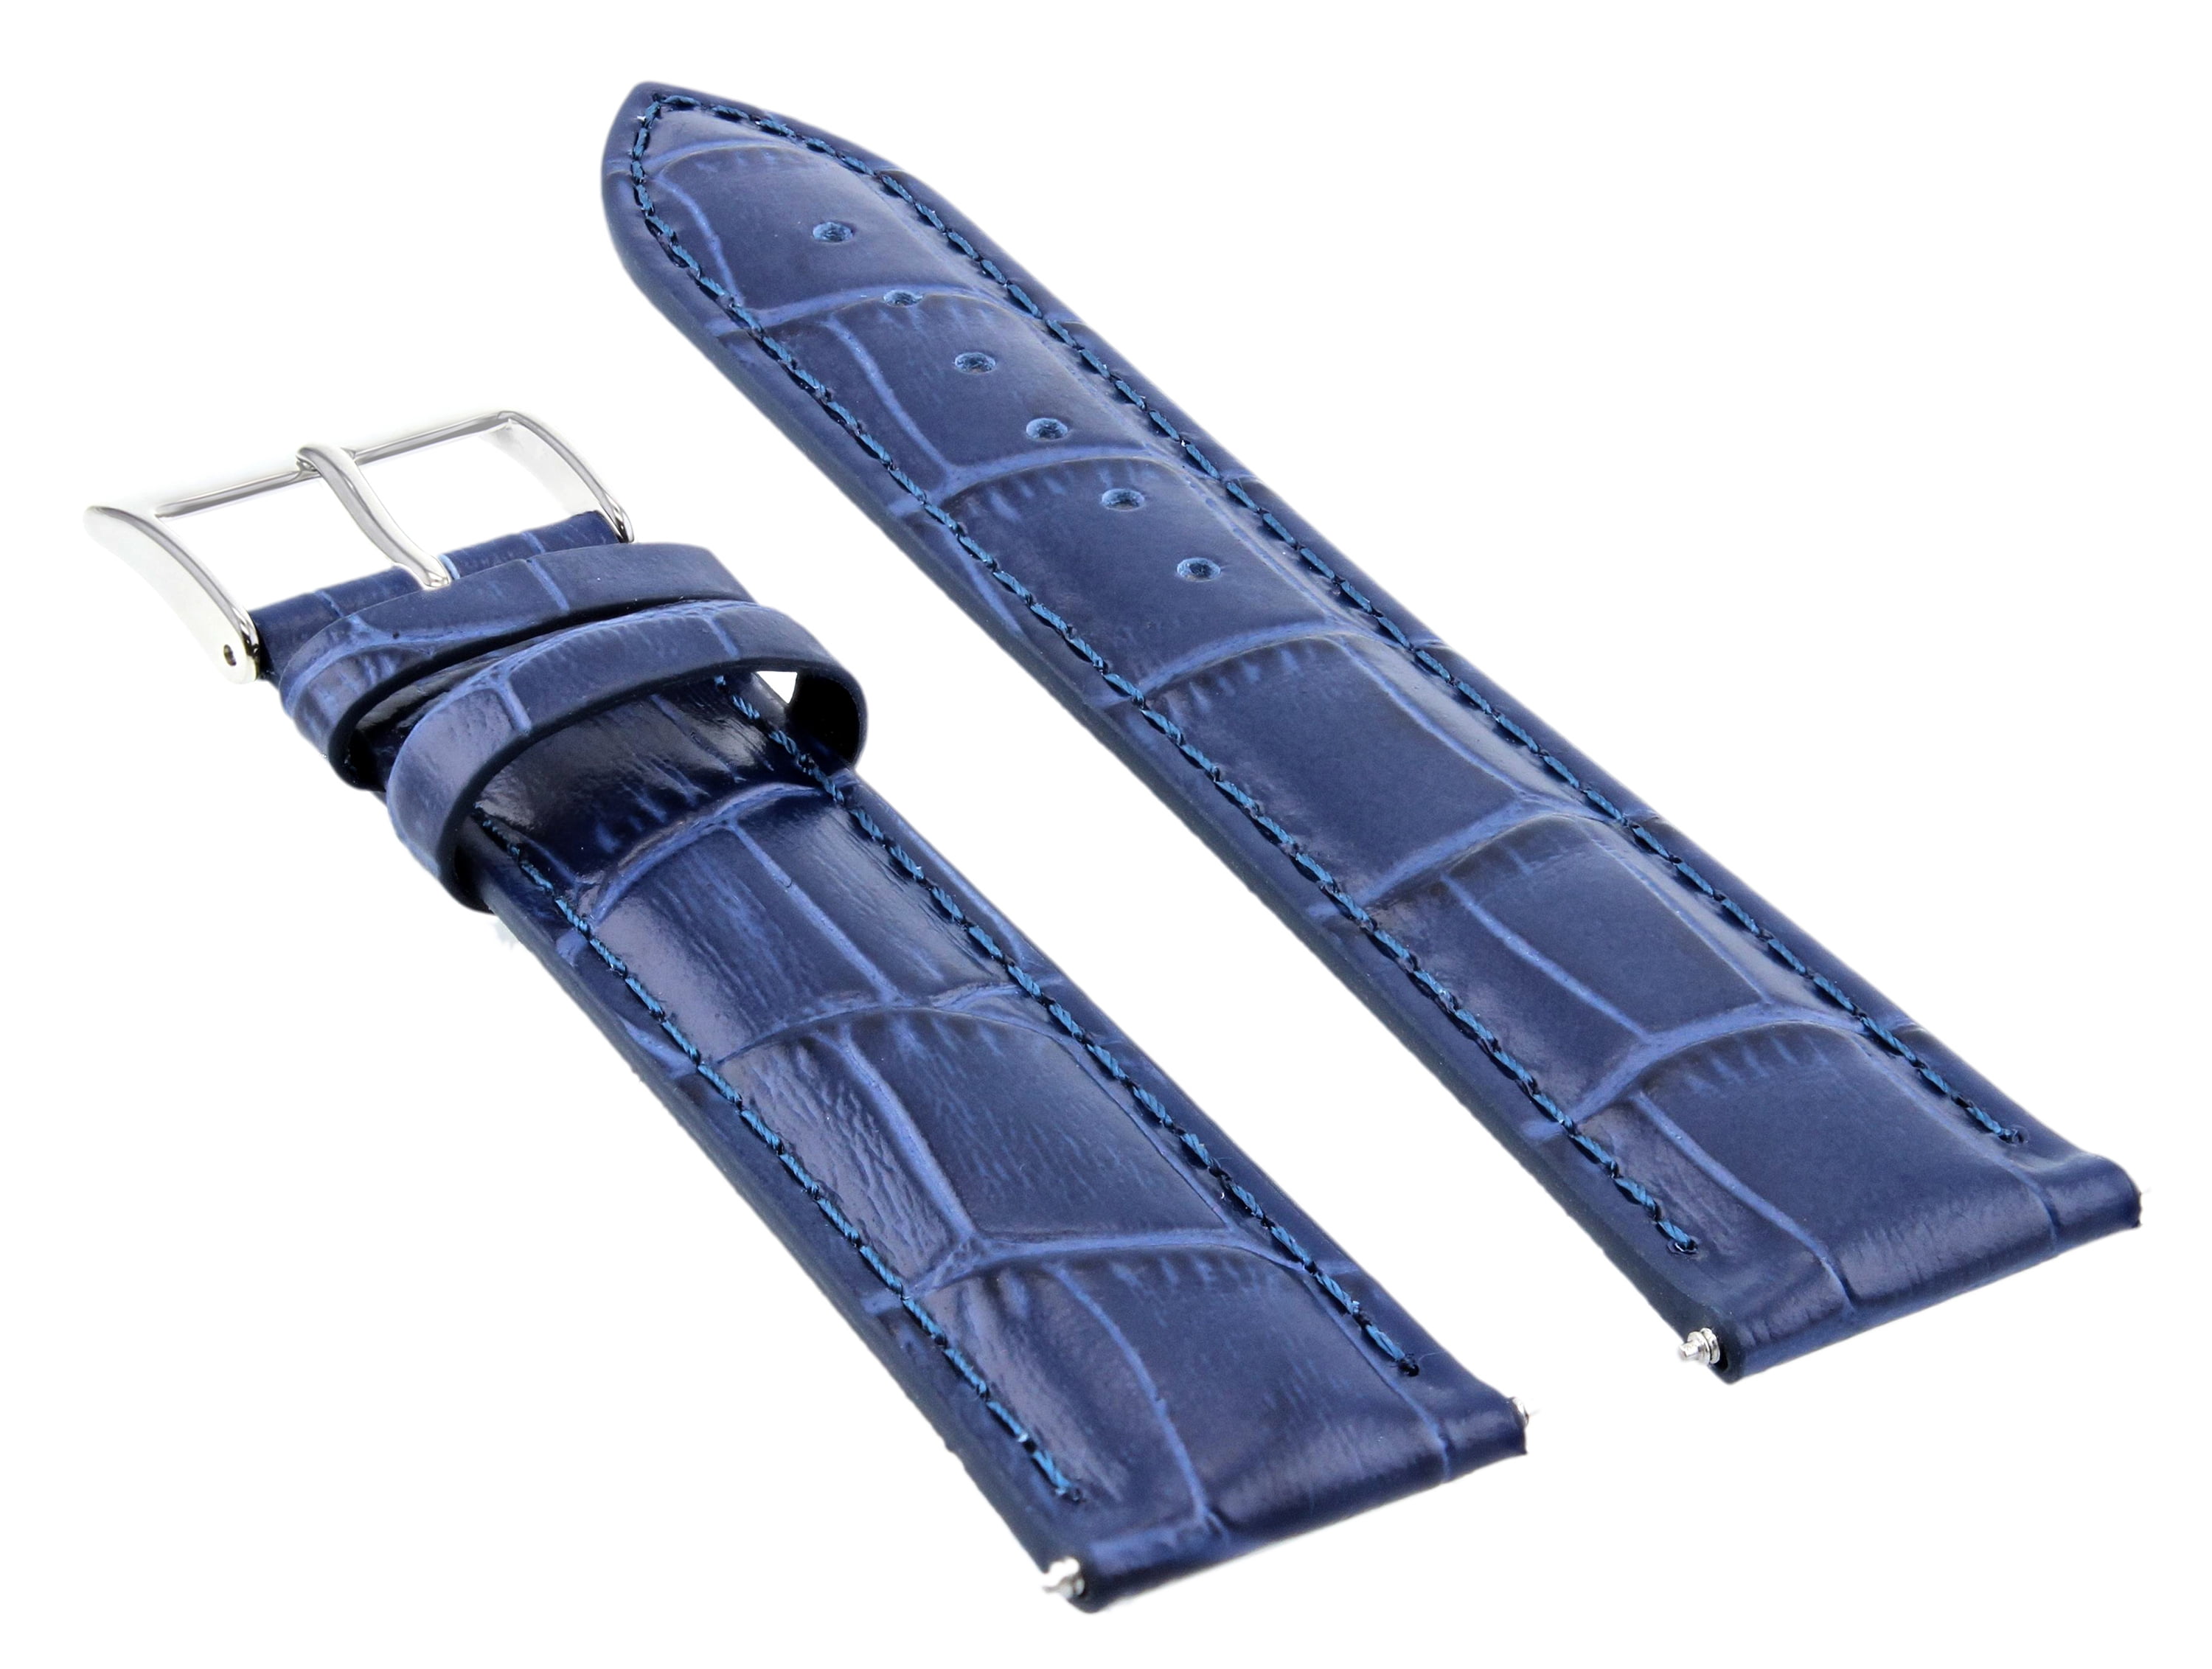 FERNBE Stainless Steel Watch Band for Cartier-TANK Series